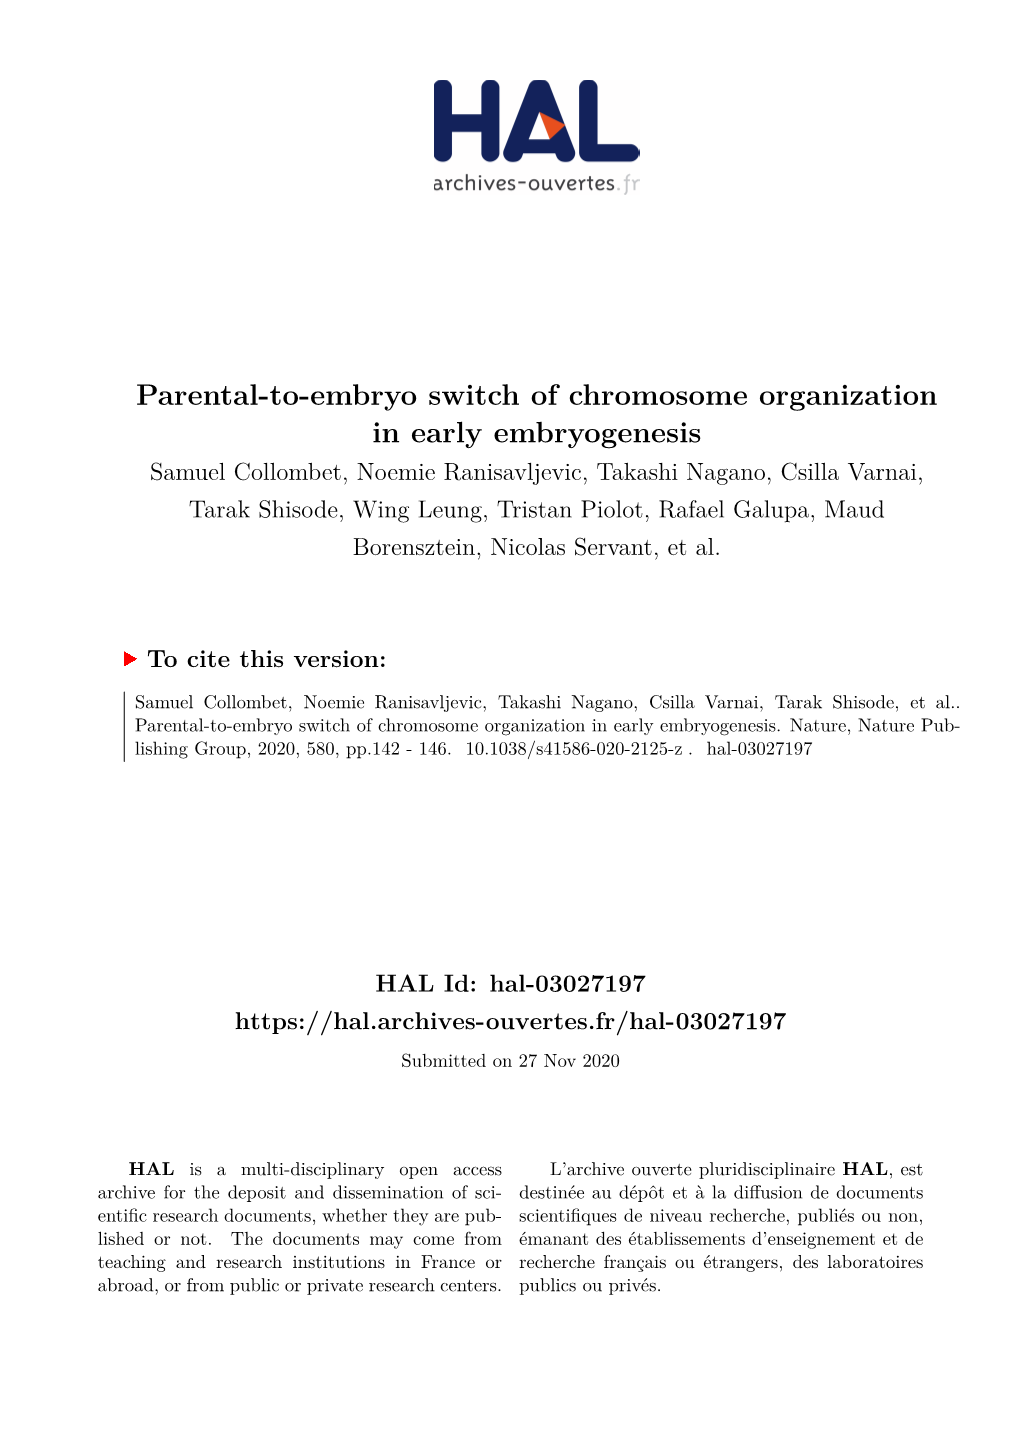 Parental-To-Embryo Switch of Chromosome Organization in Early